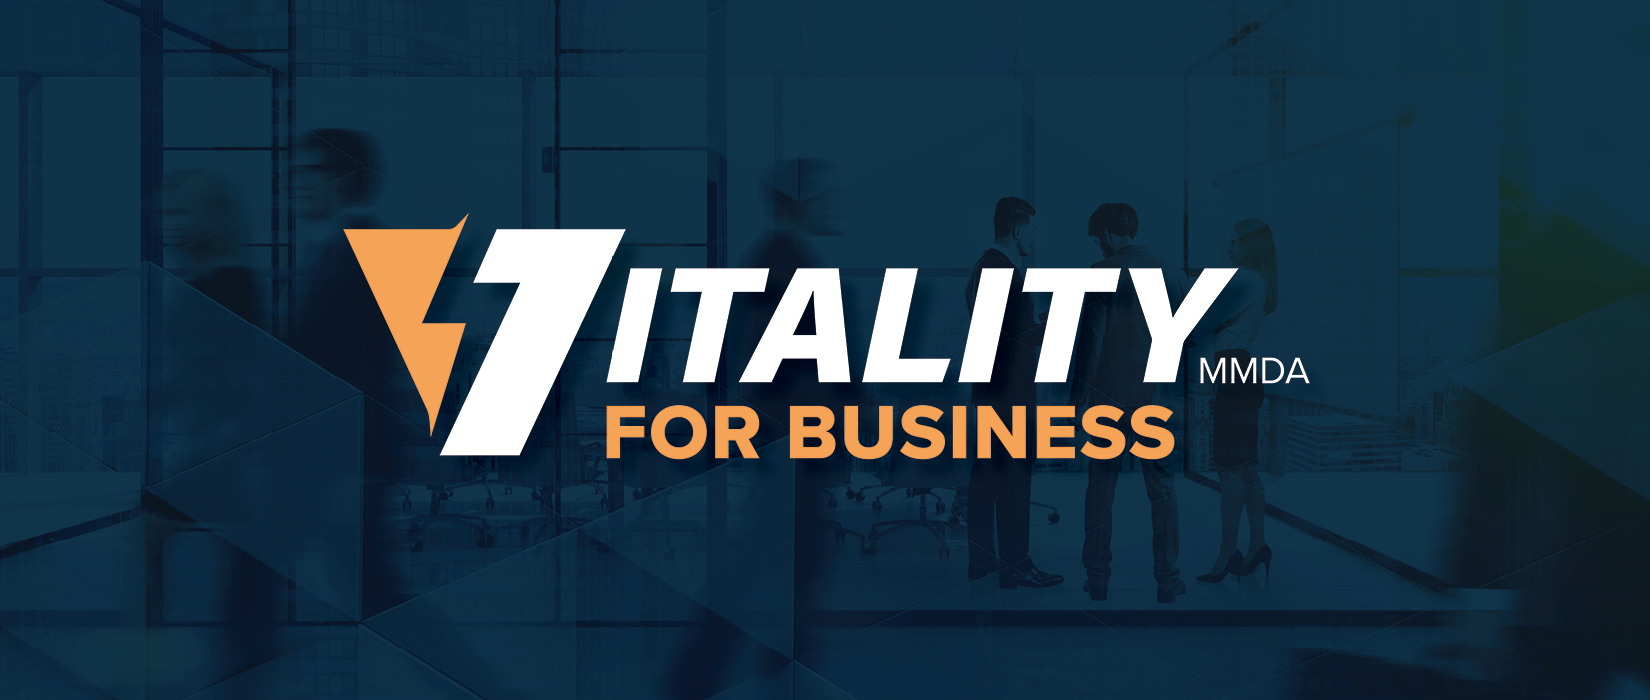 Vitality for business